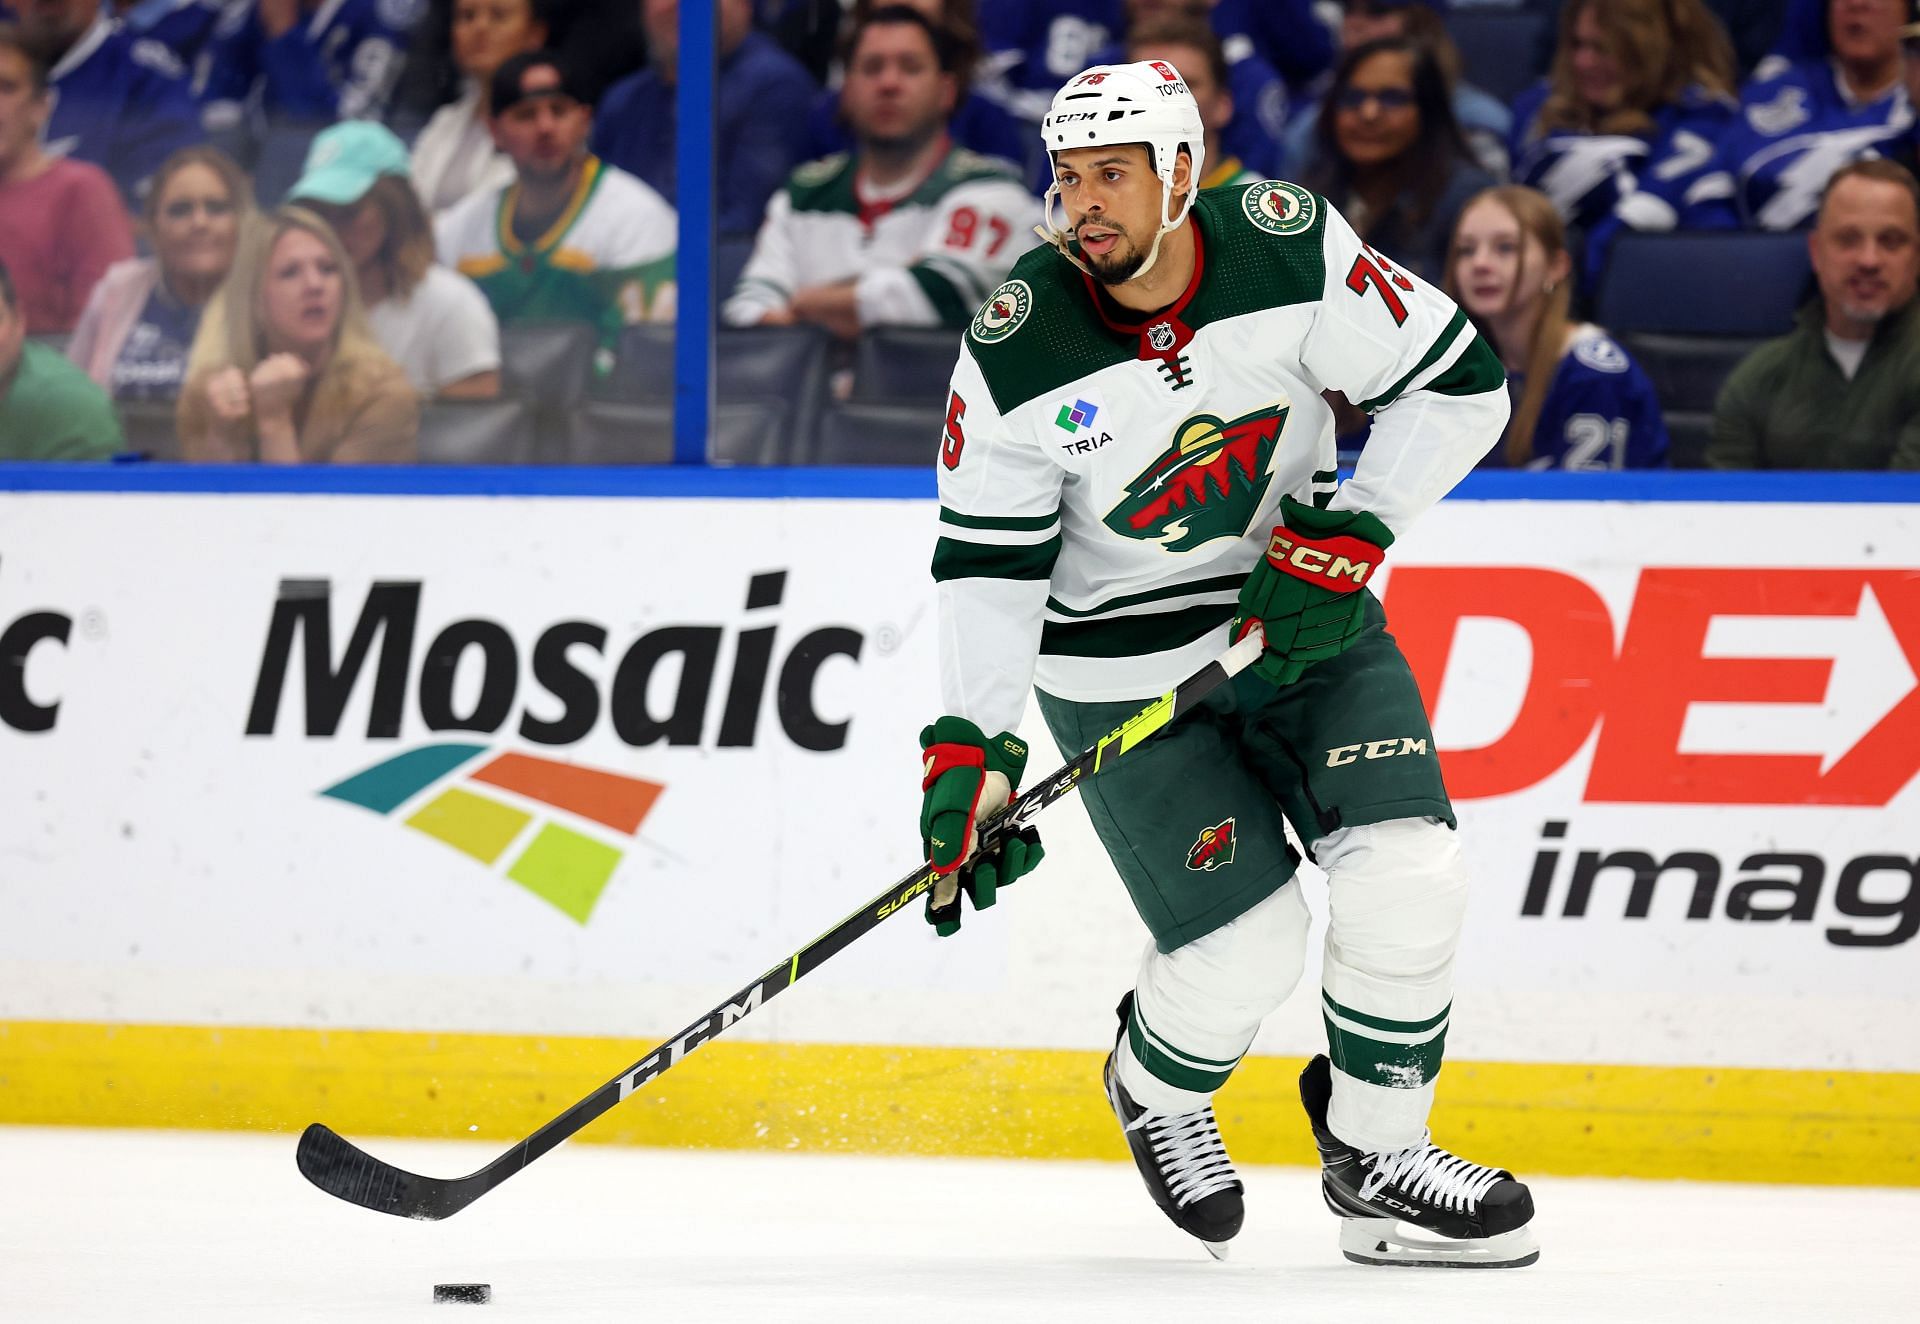 Russo and Smith: How Kirill Kaprizov got the 'A,' Ryan Reaves